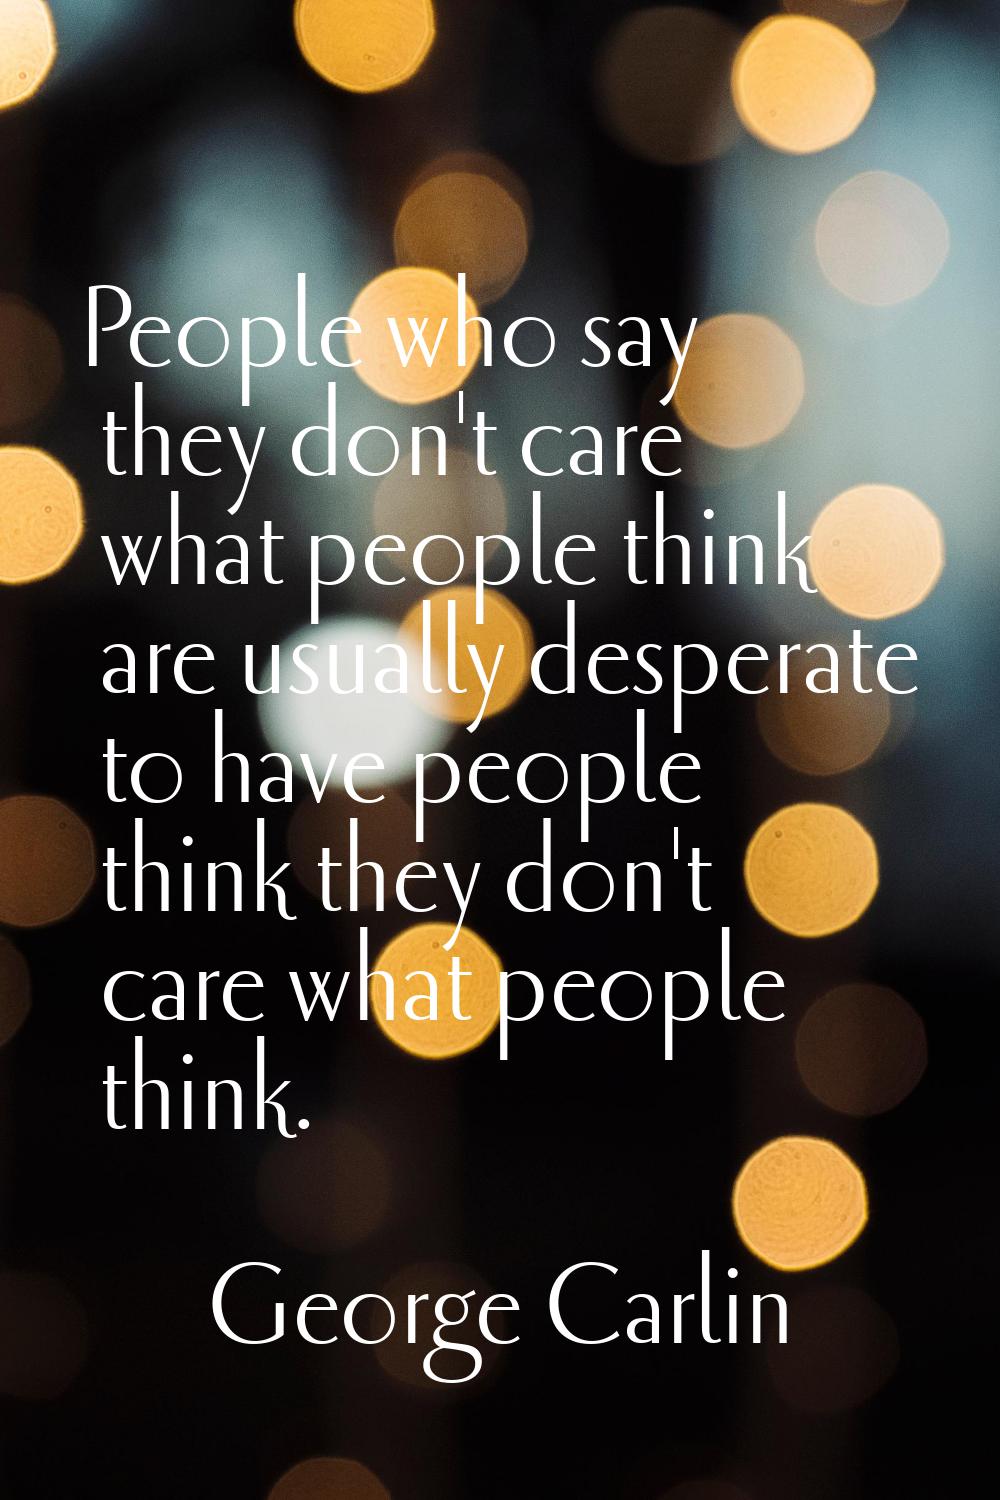 People who say they don't care what people think are usually desperate to have people think they do